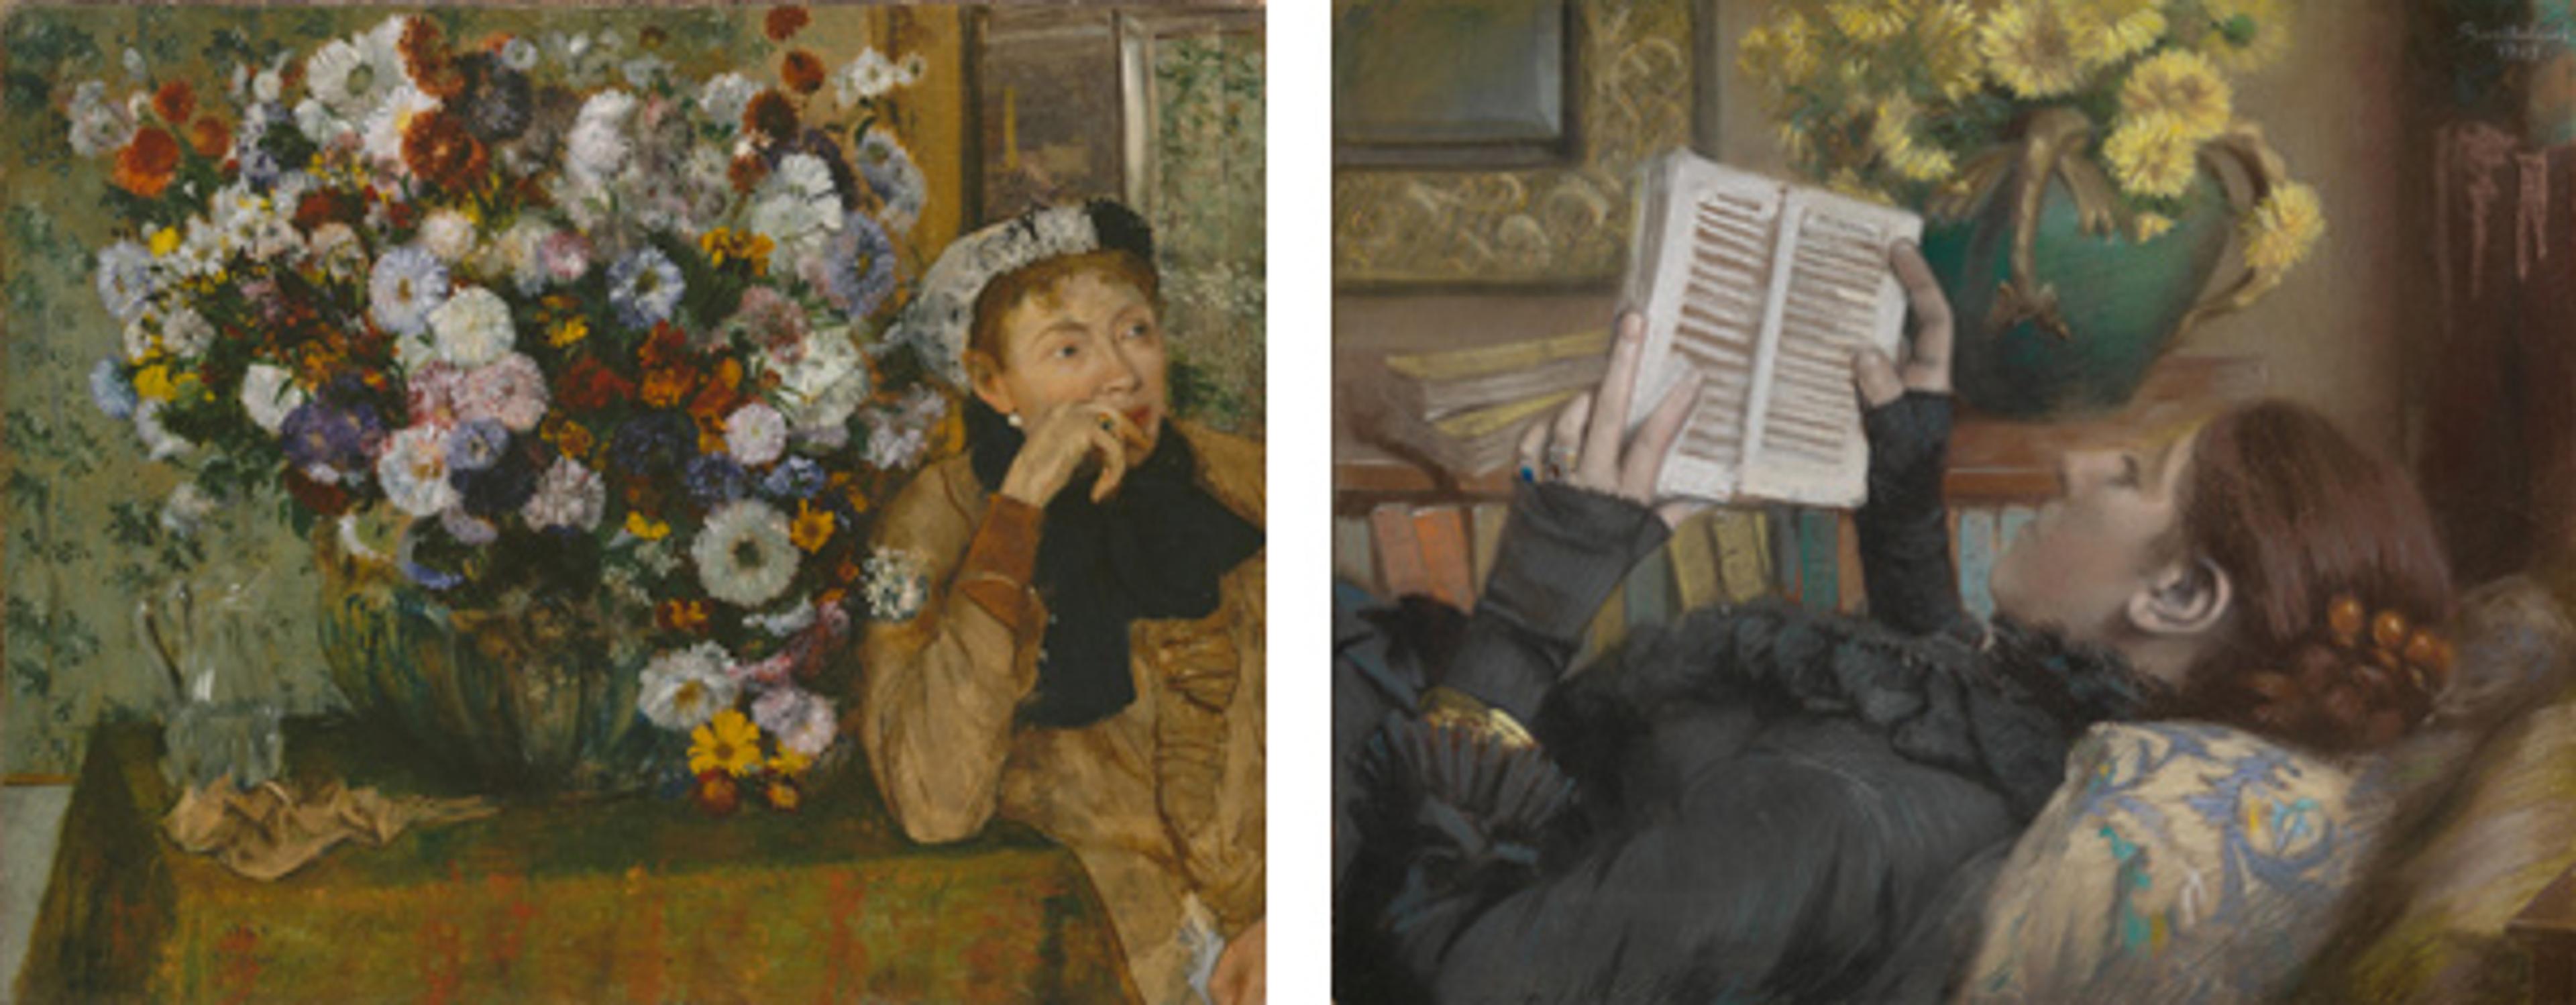 Left: Edgar Degas (French, 1834–1917). A Woman Seated beside a Vase of Flowers (Madame Paul Valpinçon?), 1865. Oil on canvas; 29 x 36 1/2 in. (73.7 x 92.7 cm). The Metropolitan Museum of Art, New York, H. O. Havemeyer Collection, Bequest of Mrs. H. O. Havemeyer, 1929 (29.100.128). Right: Albert Bartholomé (French, 1848–1928). The Artist's Wife (Périe, 1849–1887) Reading, 1883. Pastel and charcoal on wove paper, laid down on blue wove paper, laid down on stretched canvas; 19 7/8 x 24 1/8 in. (50.5 x 61.3 cm). The Metropolitan Museum of Art, New York, Catharine Lorillard Wolfe Collection, Wolfe Fund, 1990 (1990.117)